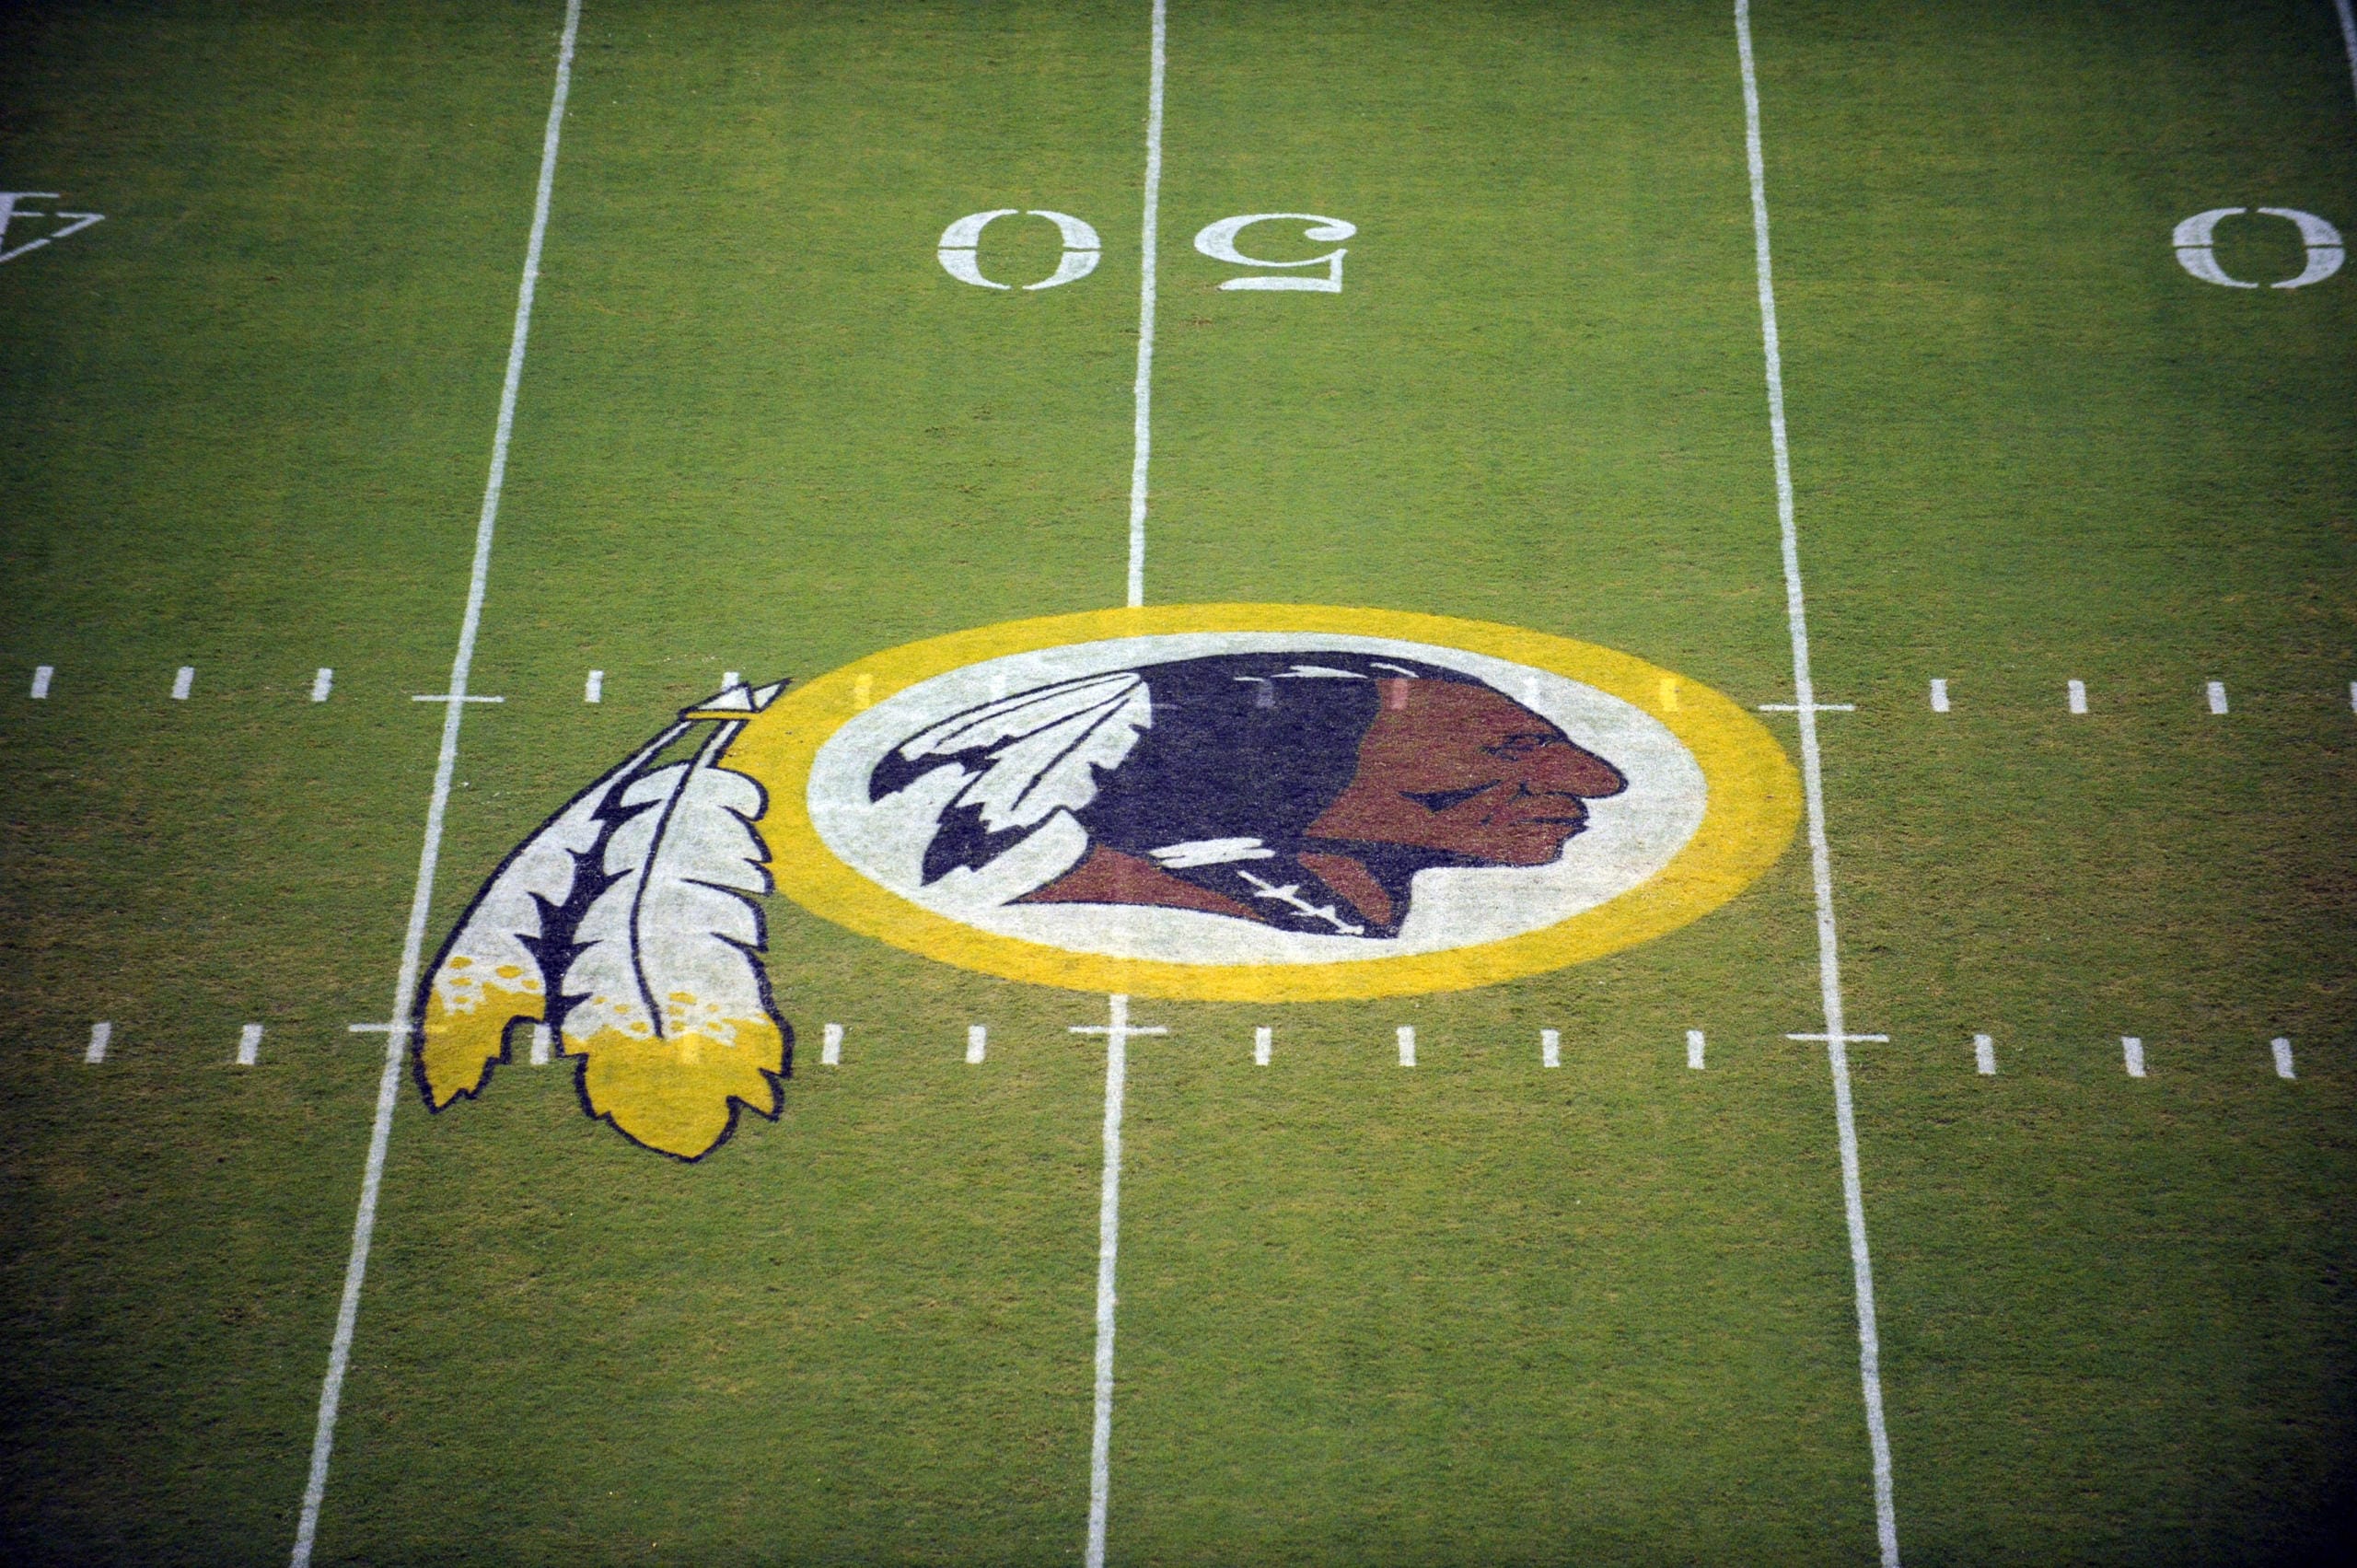 The Washington Redskins logo is shown on the FedEx Field grass in Landover, Md. The Washington Redskins are undergoing what the team calls a “thorough review” of the nickname.